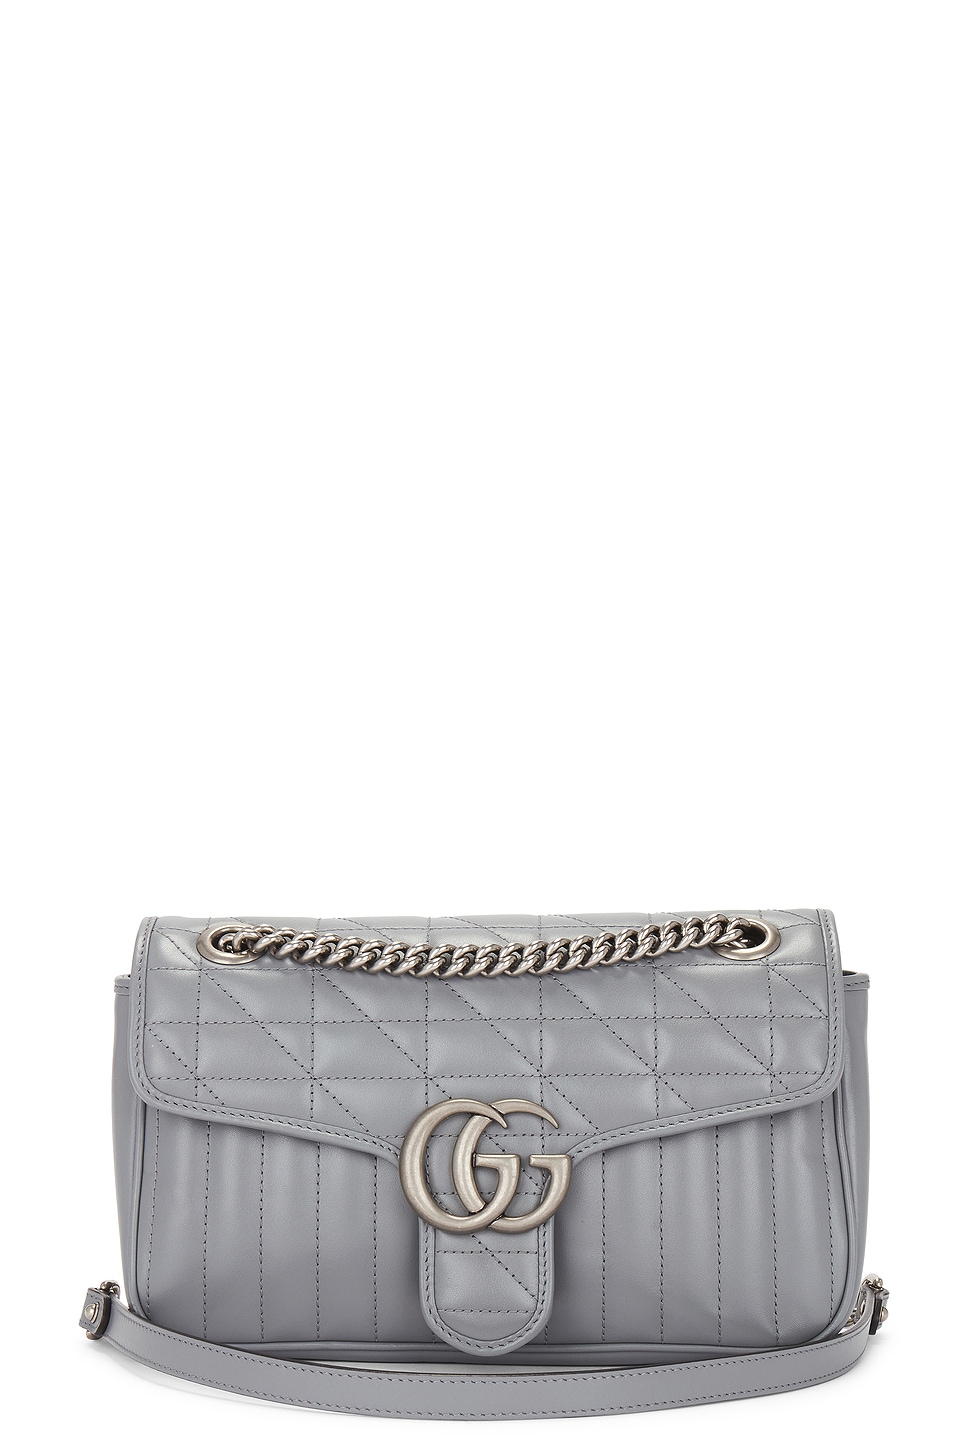 Gucci Gg Marmont Chain Shoulder Bag In Grey